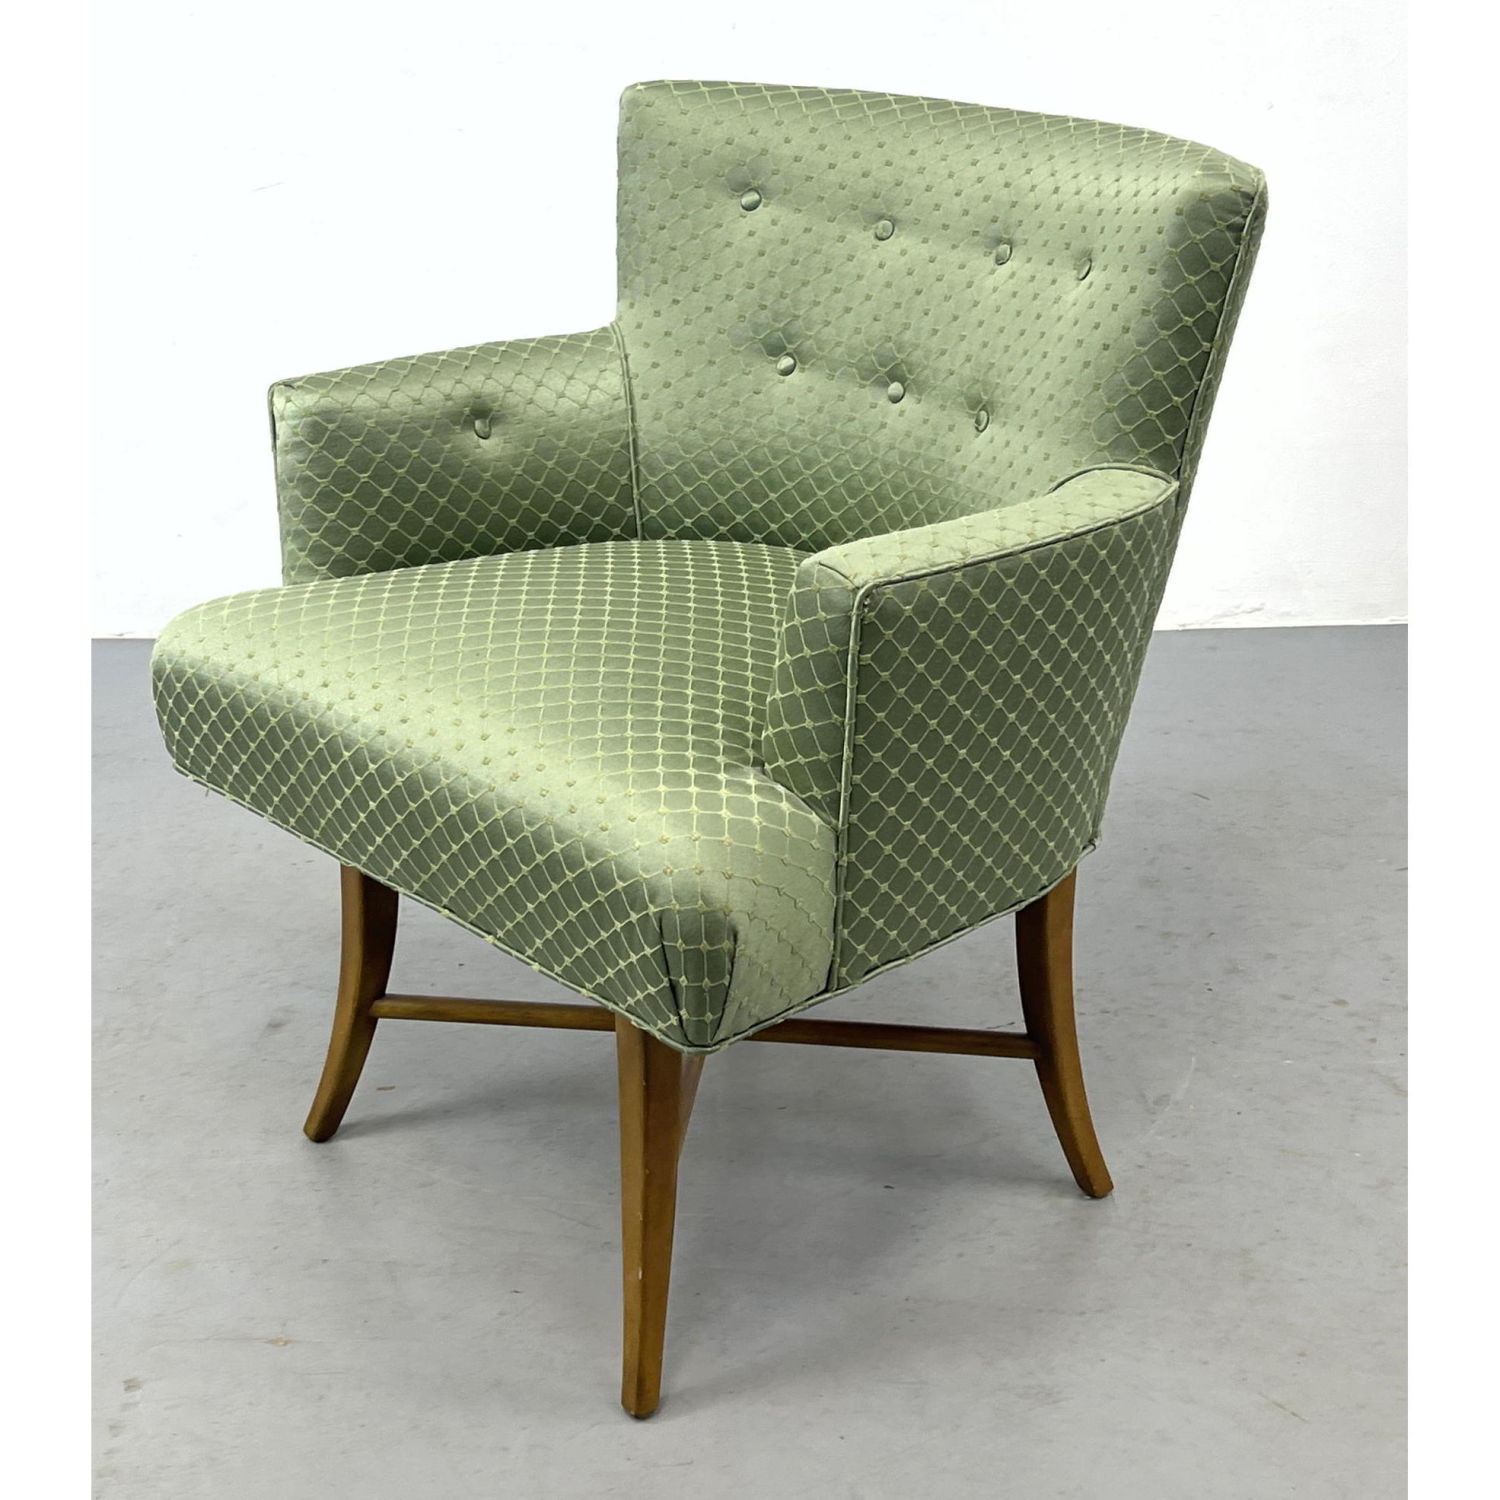 Upholstered Swivel Lounge Chair. Bland